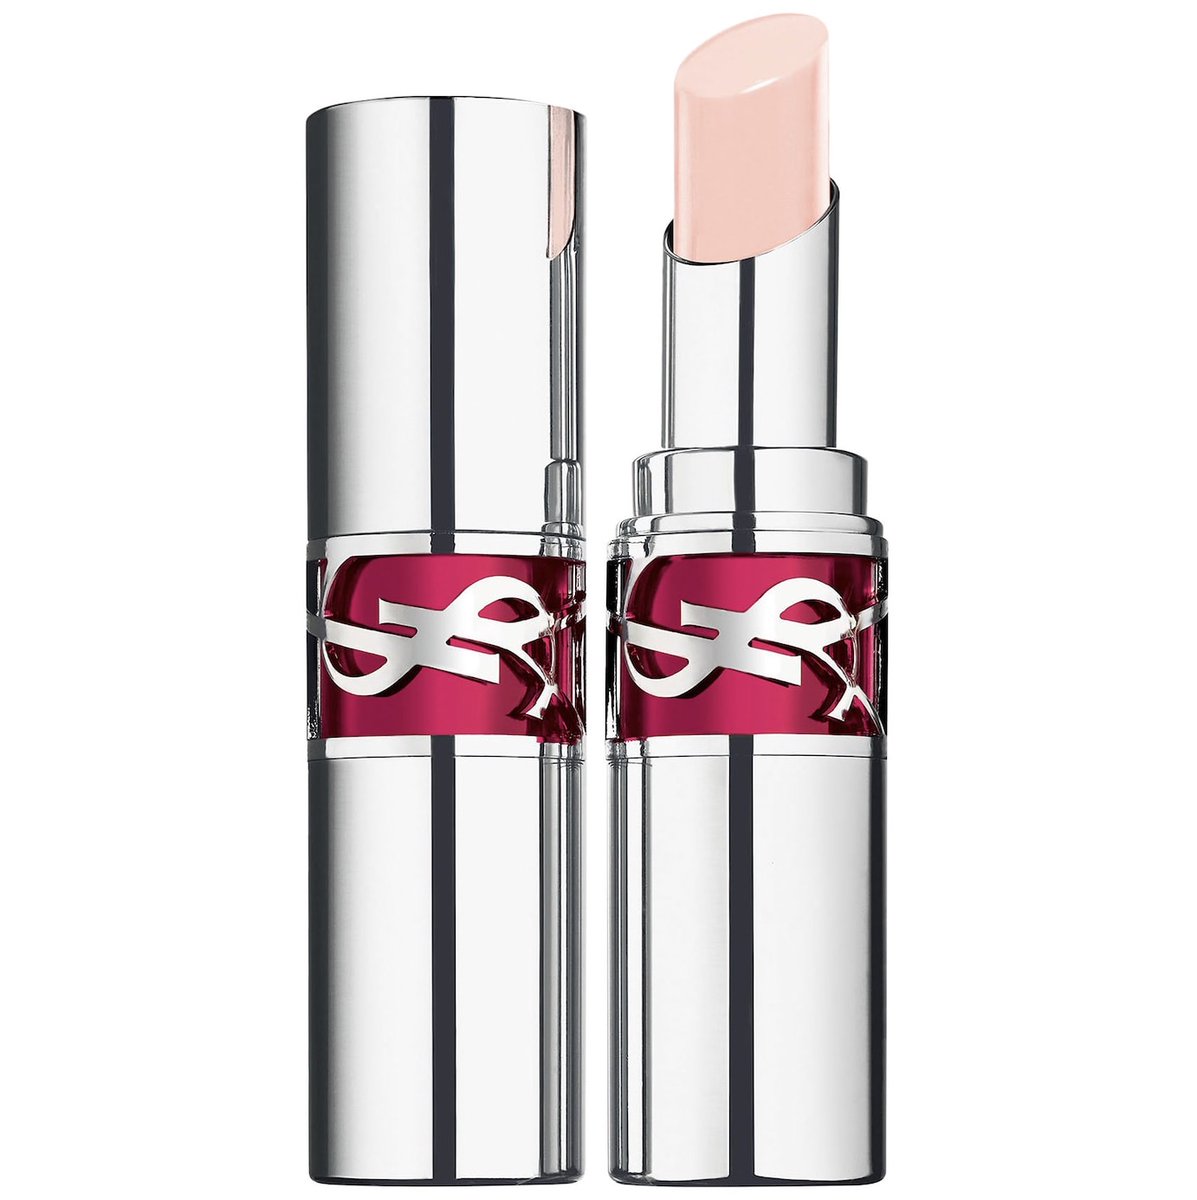 It's a 'Thank You, Followers' TwitterX Beauty Giveaway. I'm giving away YSL's Rouge Volupte Candy Glaze Healthy Glow Plumper in shade '2' To enter, follow @davelackie & RT (ends 01/19) #win It's a luxurious lip gloss stick with vitamin E & hyaluronic acid.